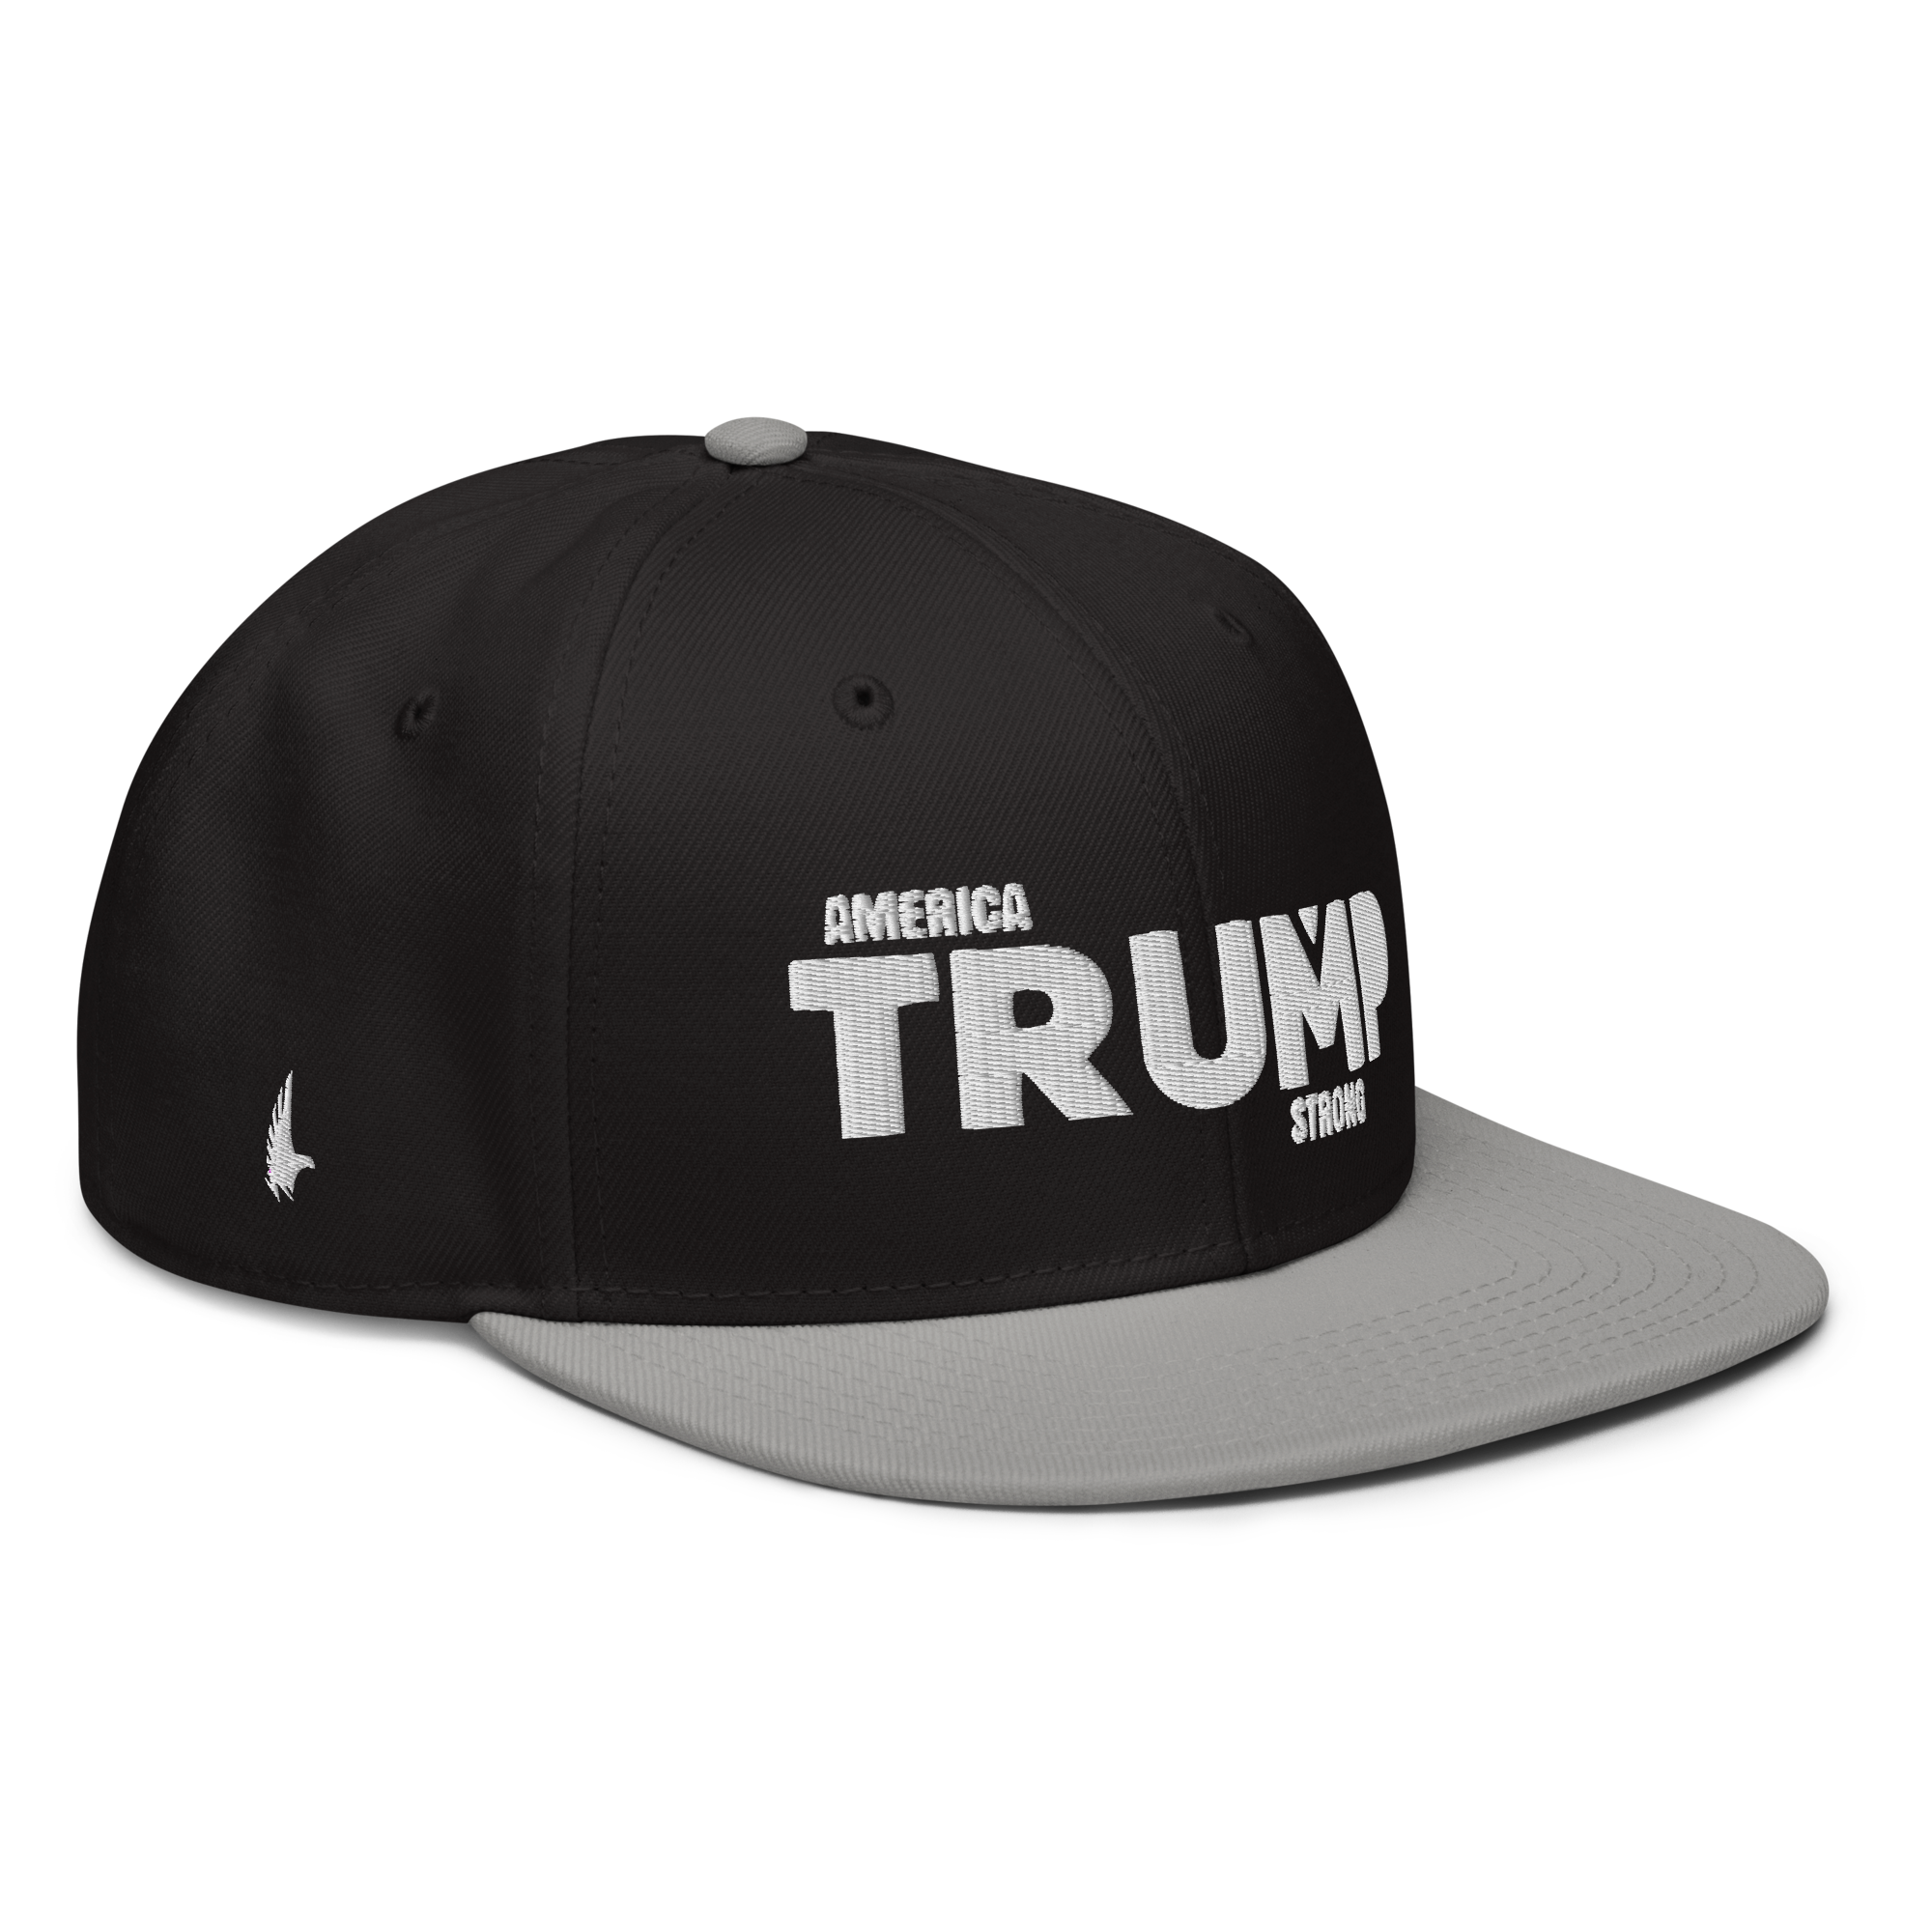 Loyalty Vibes America Trump Strong Snapback Hat Black White Grey One size - Loyalty Vibes